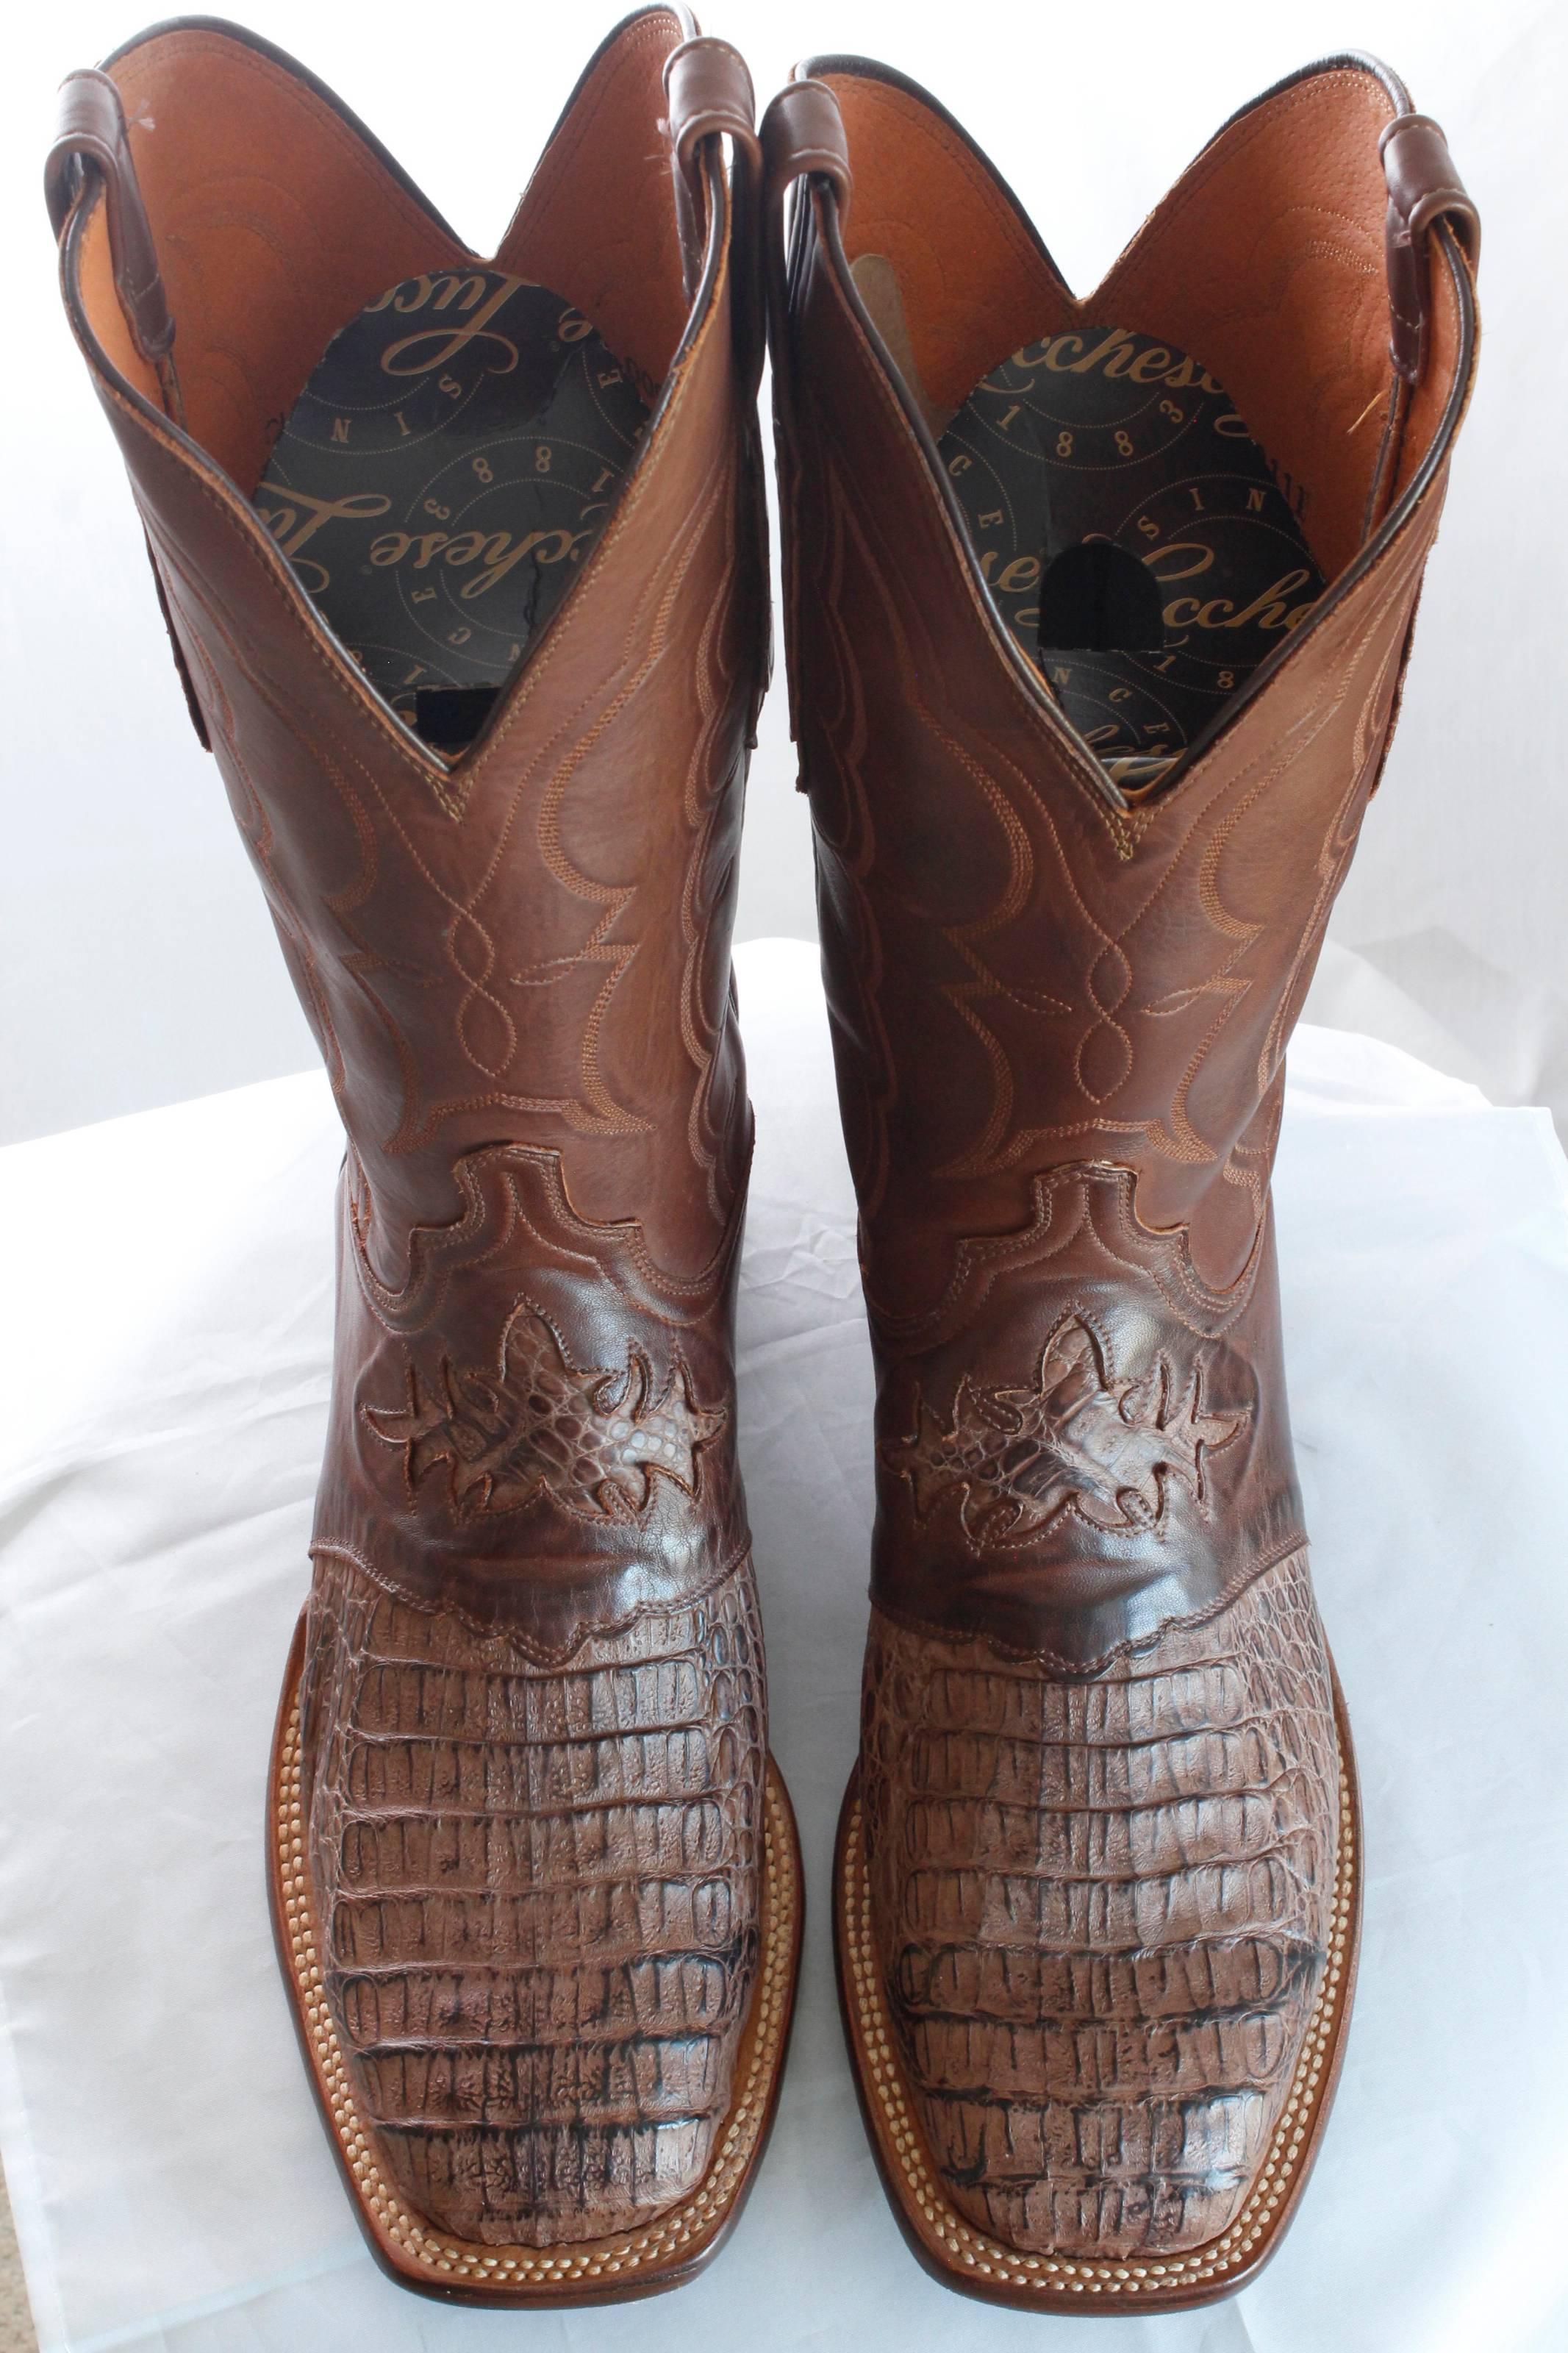 Lucchese Men's Burnished Tan Caiman Boots Size 10EE (wide).  These western style boots come with their original box and Lucchese storage bag.   In excellent condition overall, they were worn once or twice, and show some light wear to the soles. 